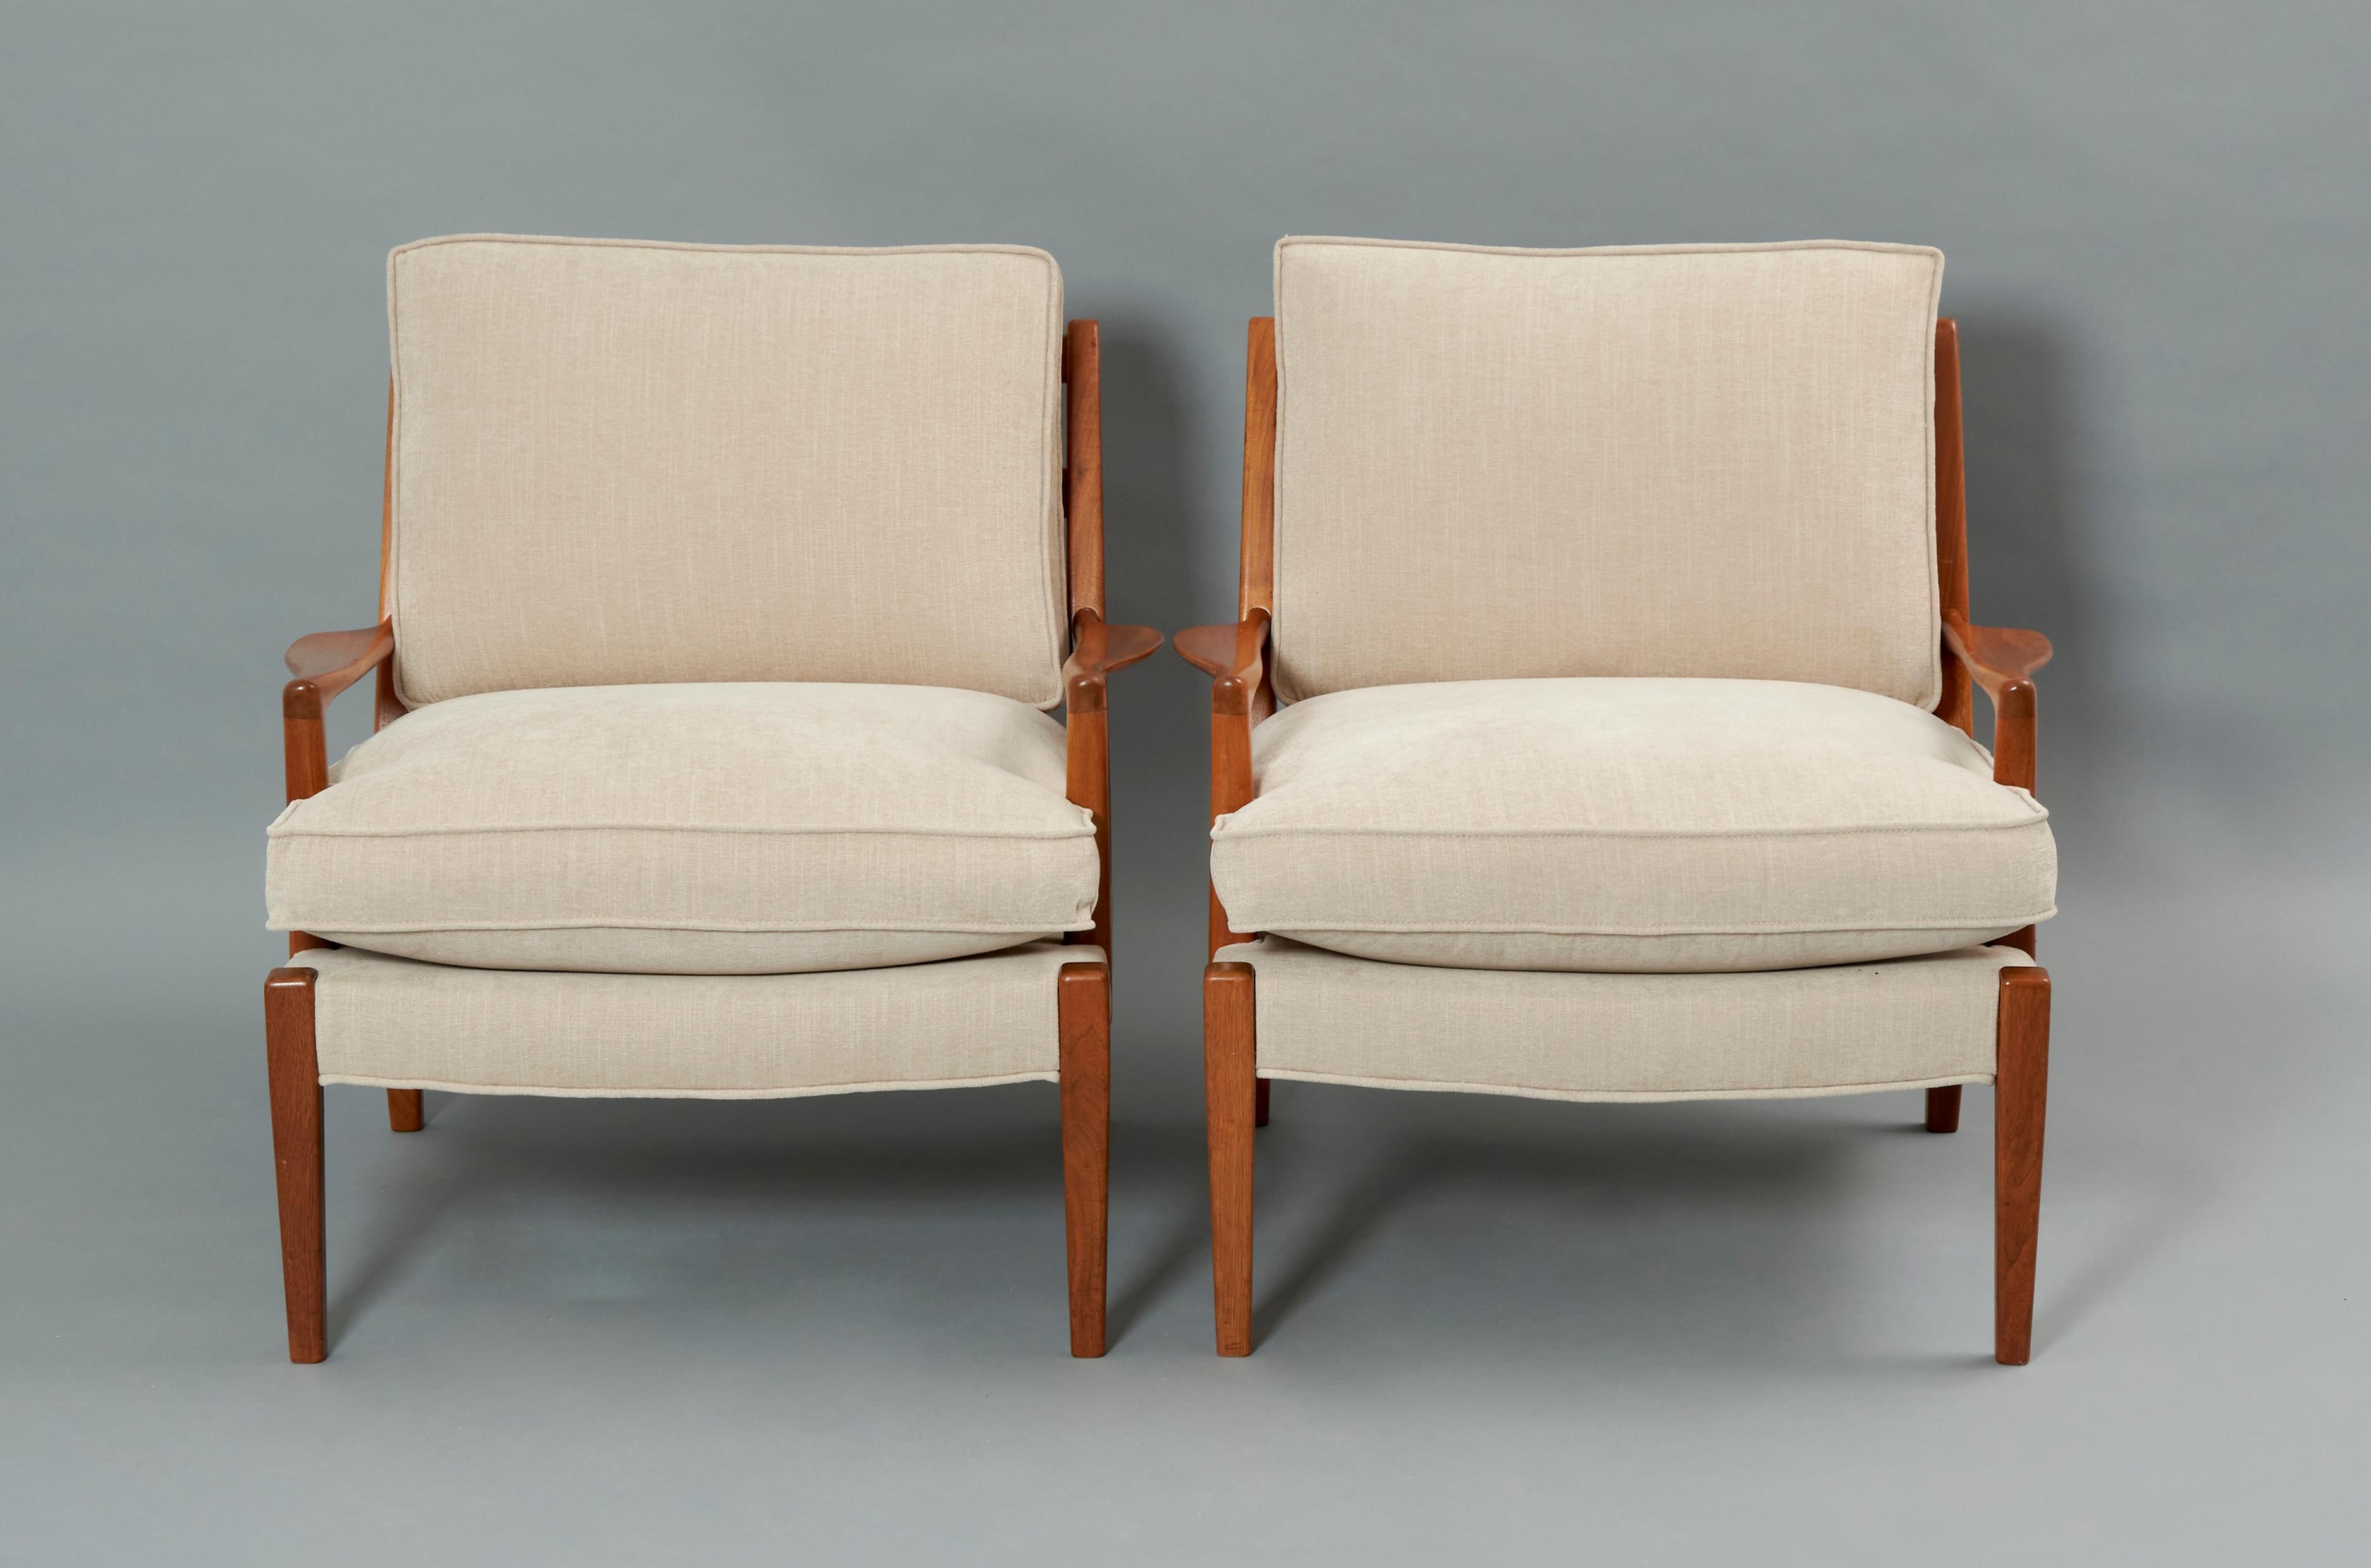 Arne Norell ‘’Löven’’ armchairs in walnut and upholstery. Restored wood with patina and renewed upholstery in grey. Sweden 1960s 
Arne Norell was a Swedish designer founder of the homonymous company Møbel AB Arne Norell. Disciple of Kaare Klimt,